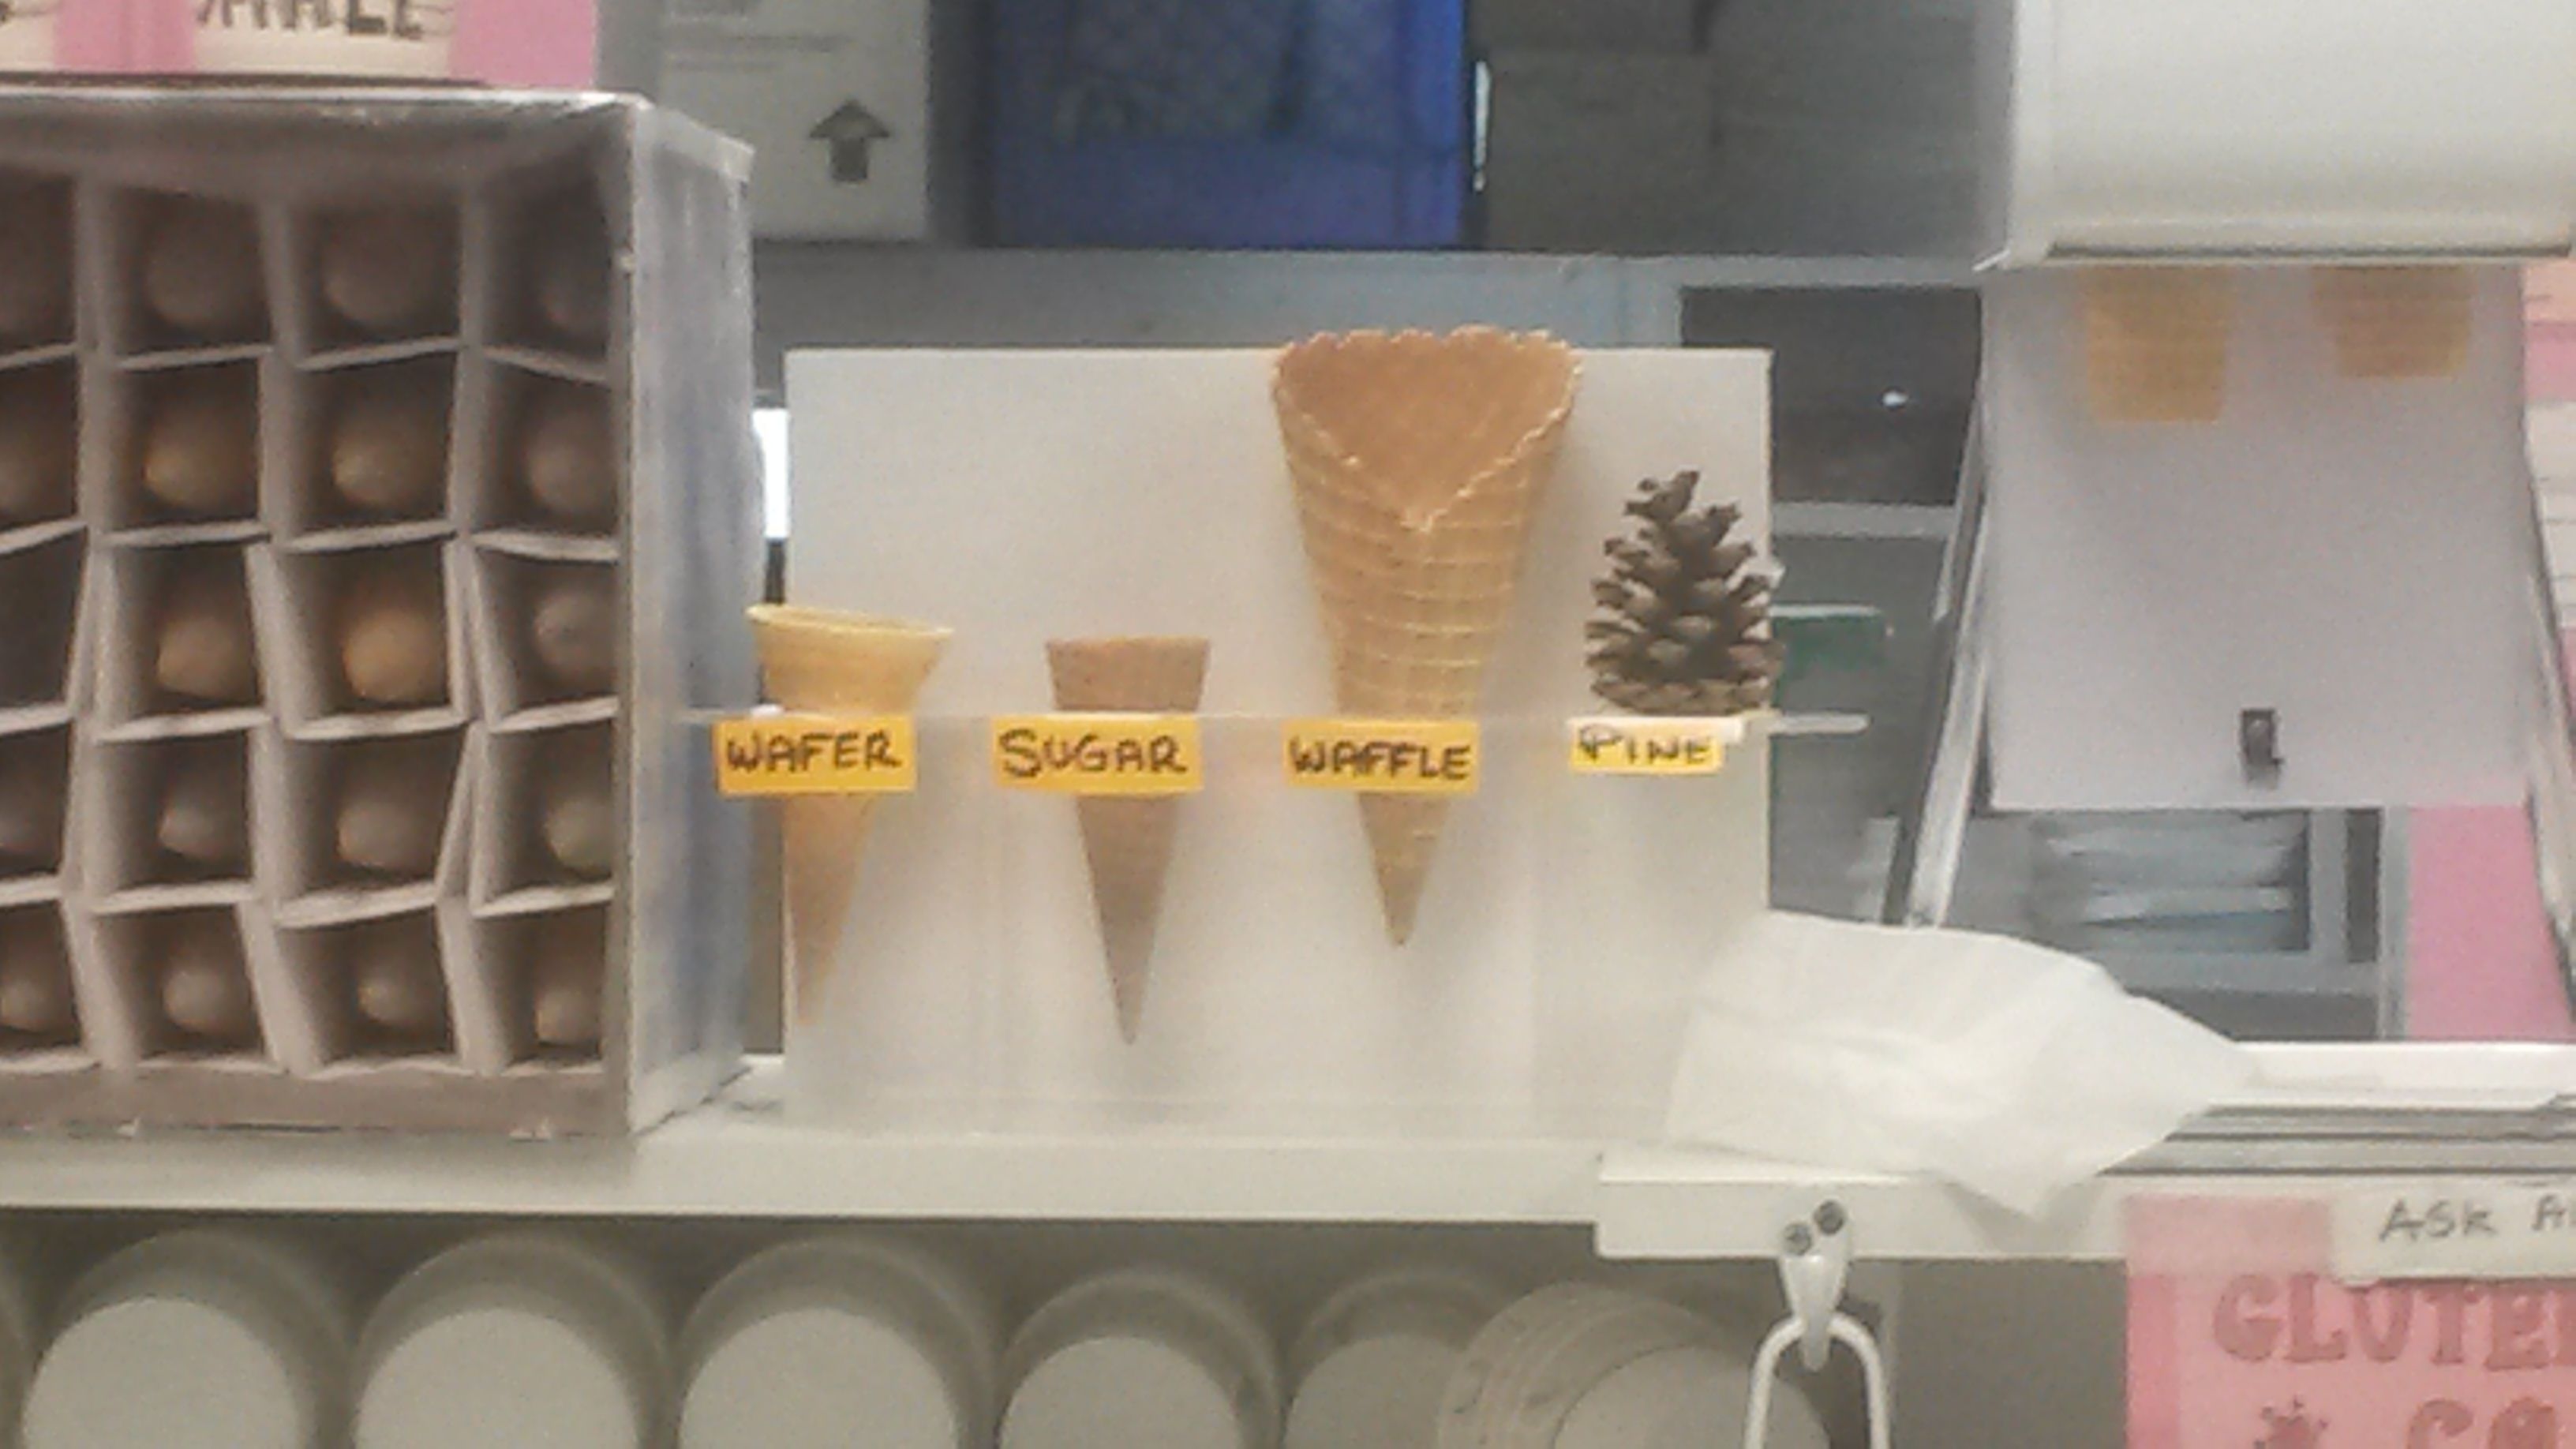 This cone display at my local ice cream shop.